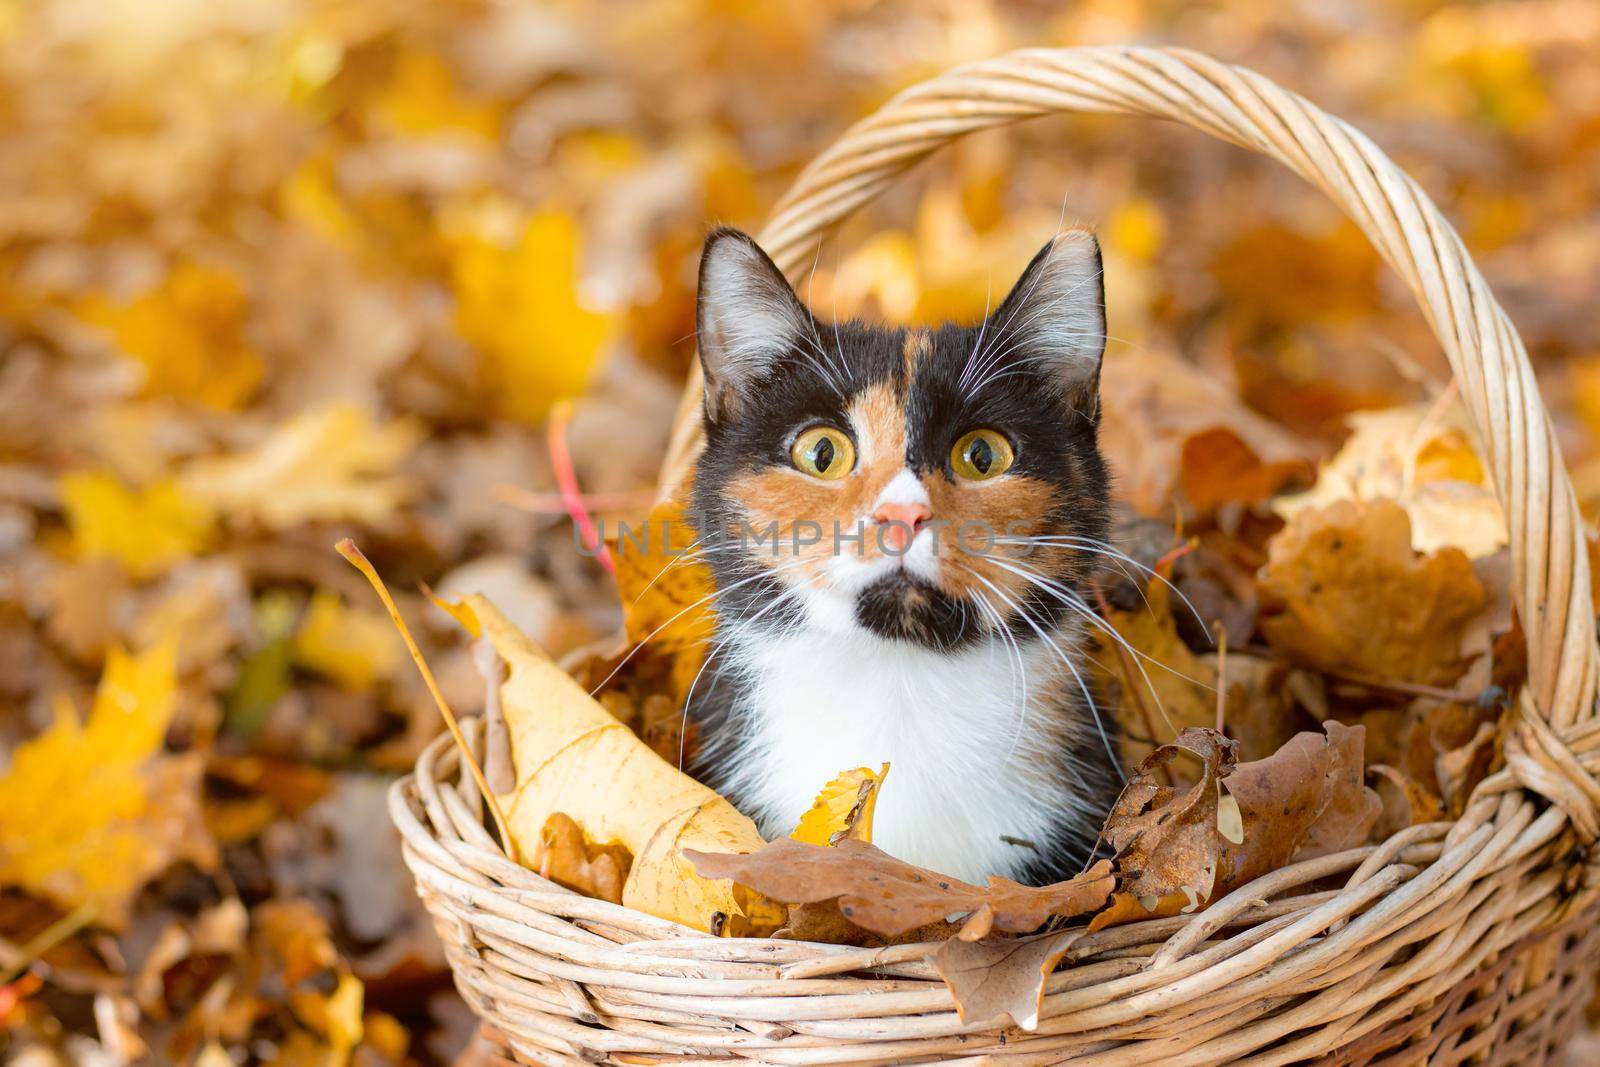 Cat sitting in a basket and autumn leaves . A young colored cat. Autumn leave. Cat in the basket. Walking a pet. Article about cats and autumn. Yellow fallen leaves. Photos for printed products